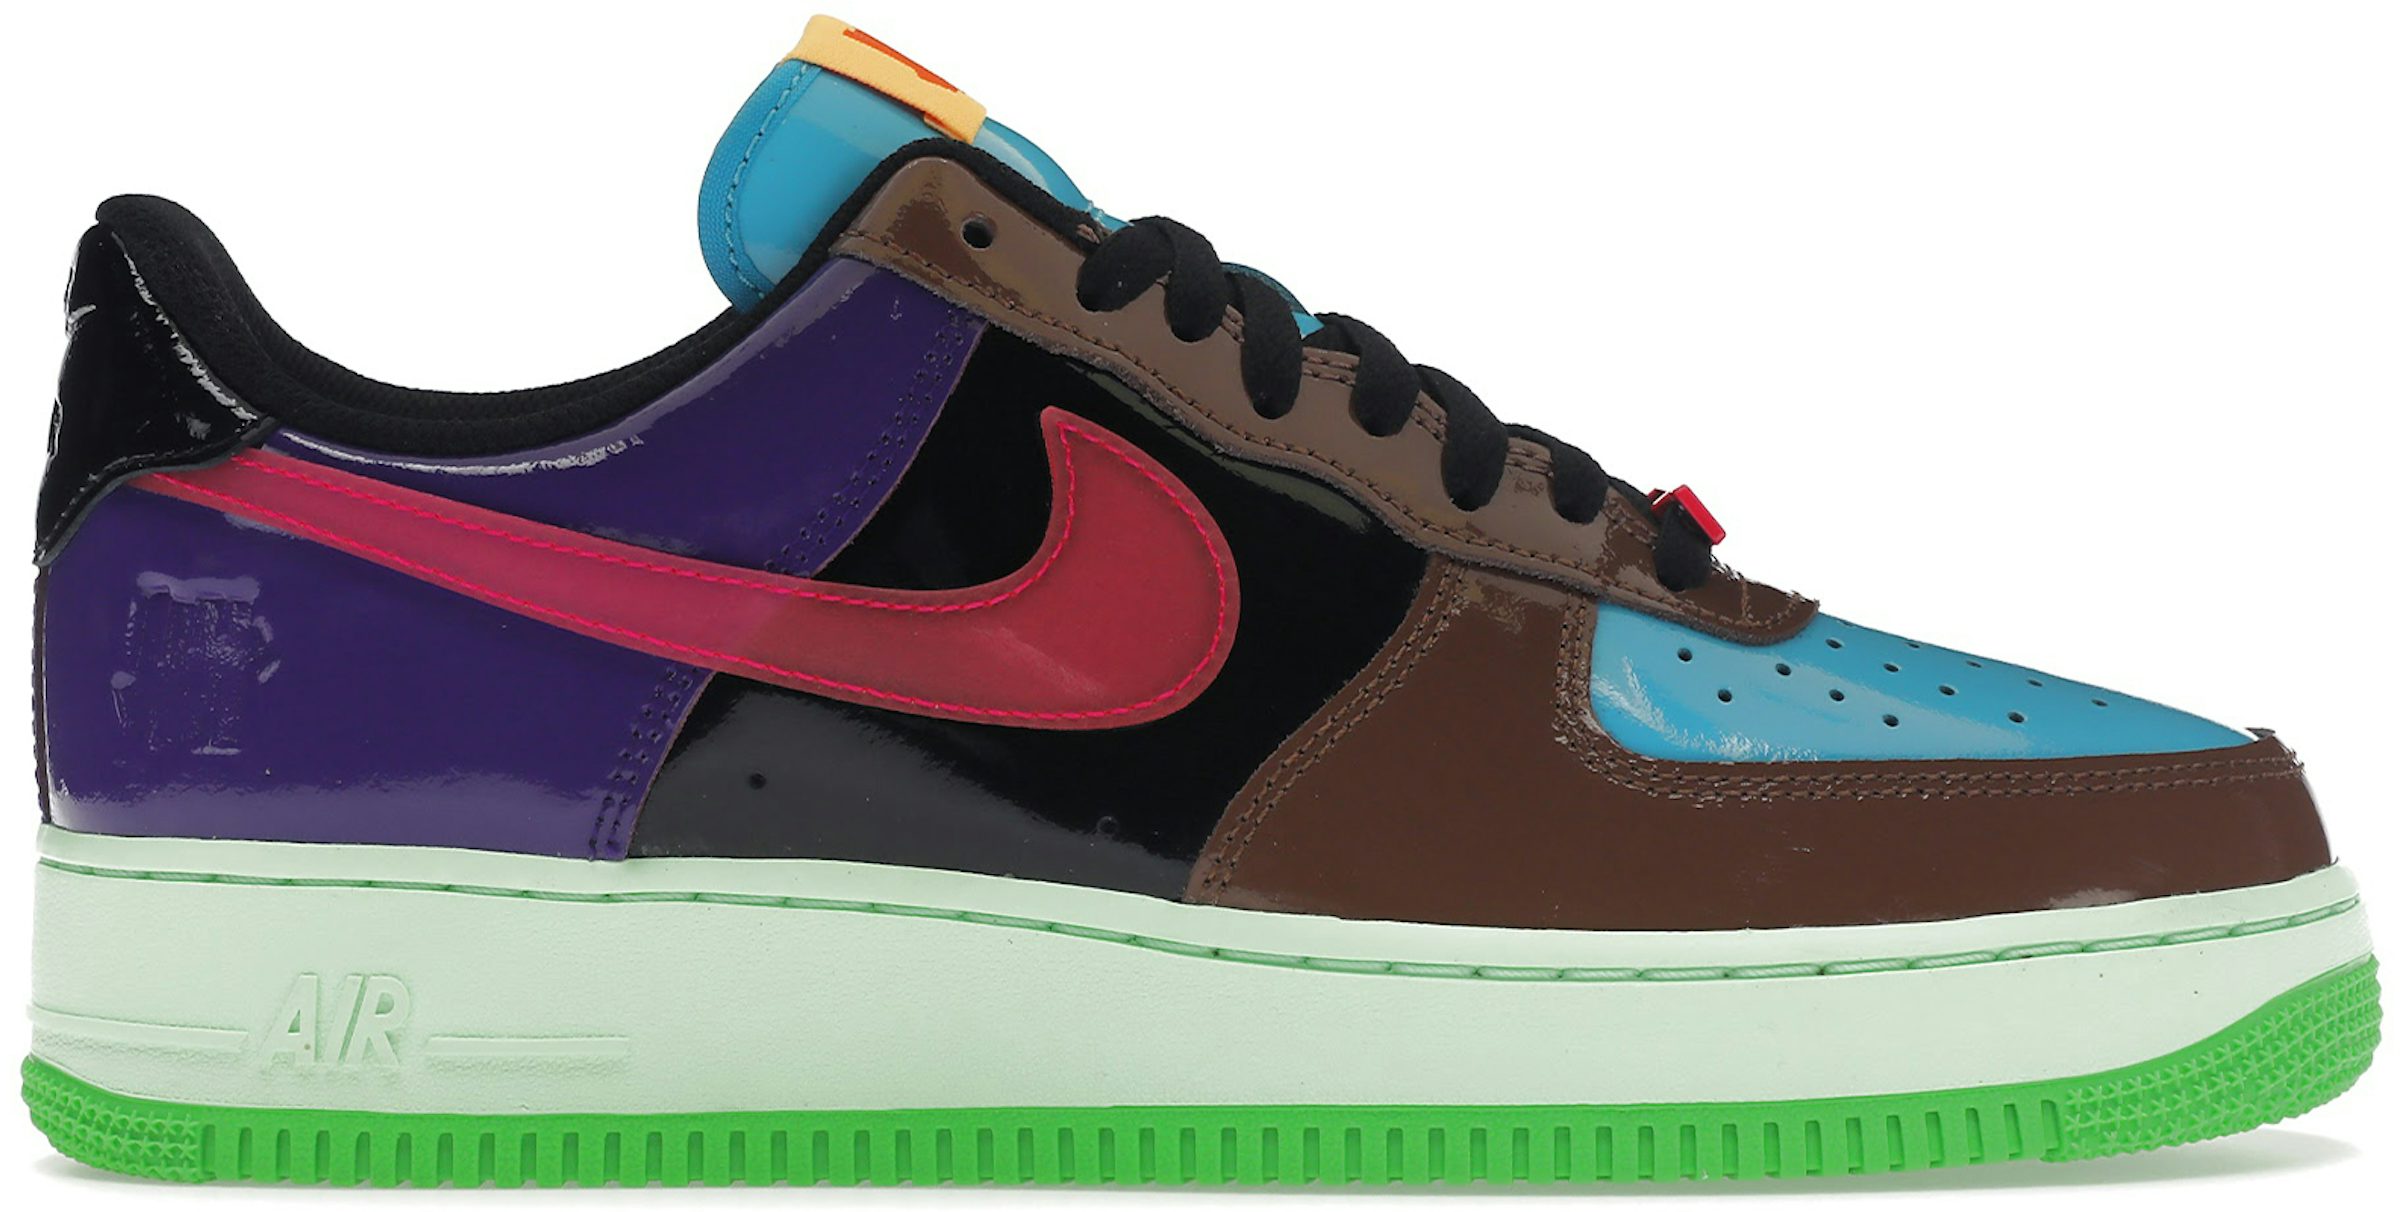 painted air force ones ideas